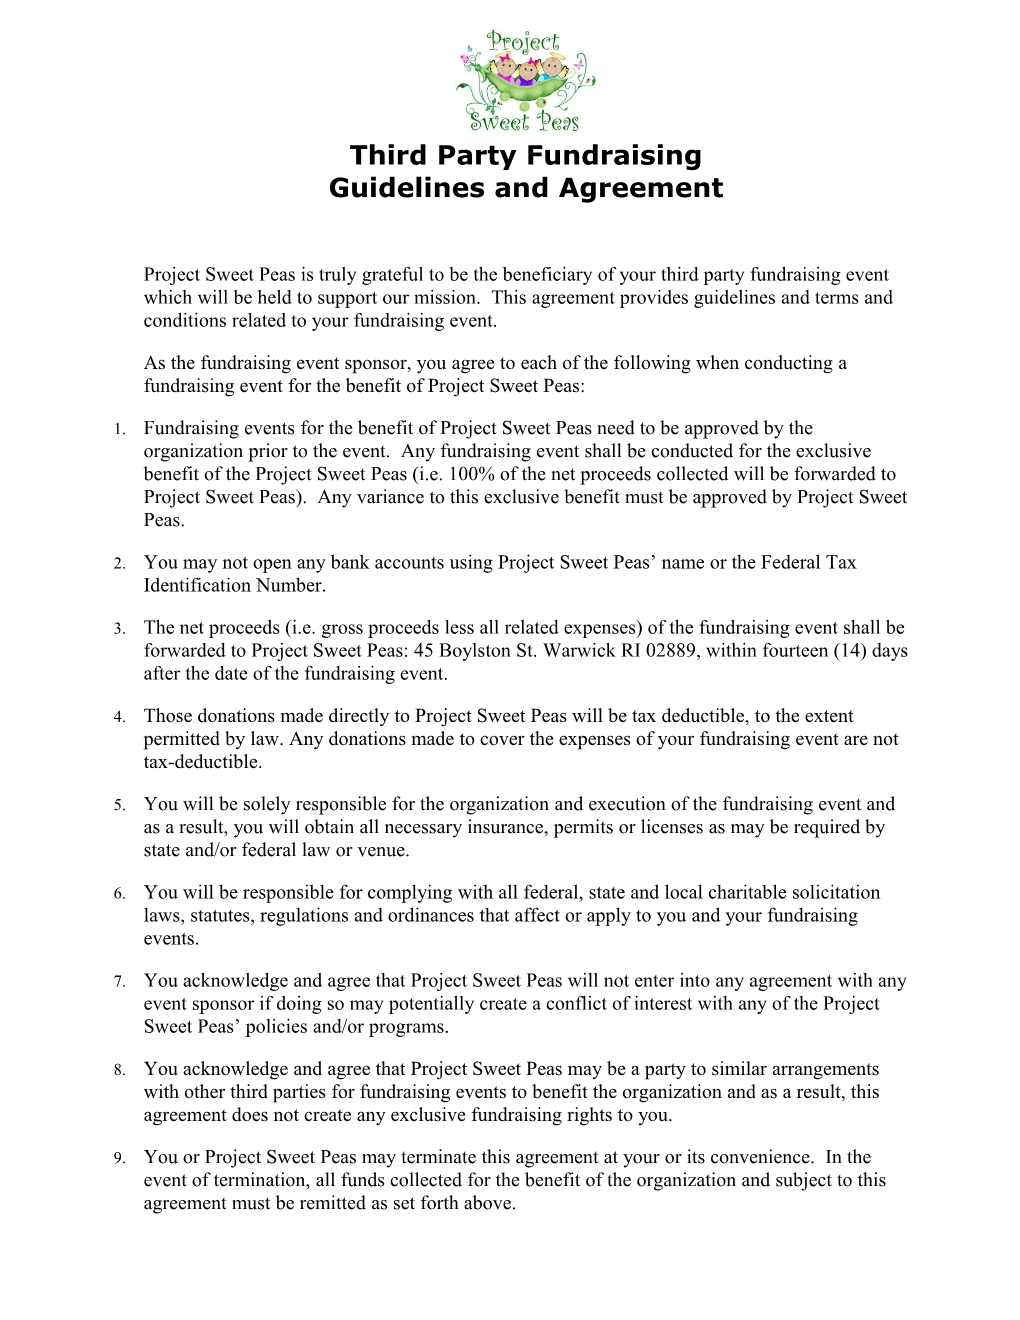 Third Party Fundraising Guidelines and Agreement